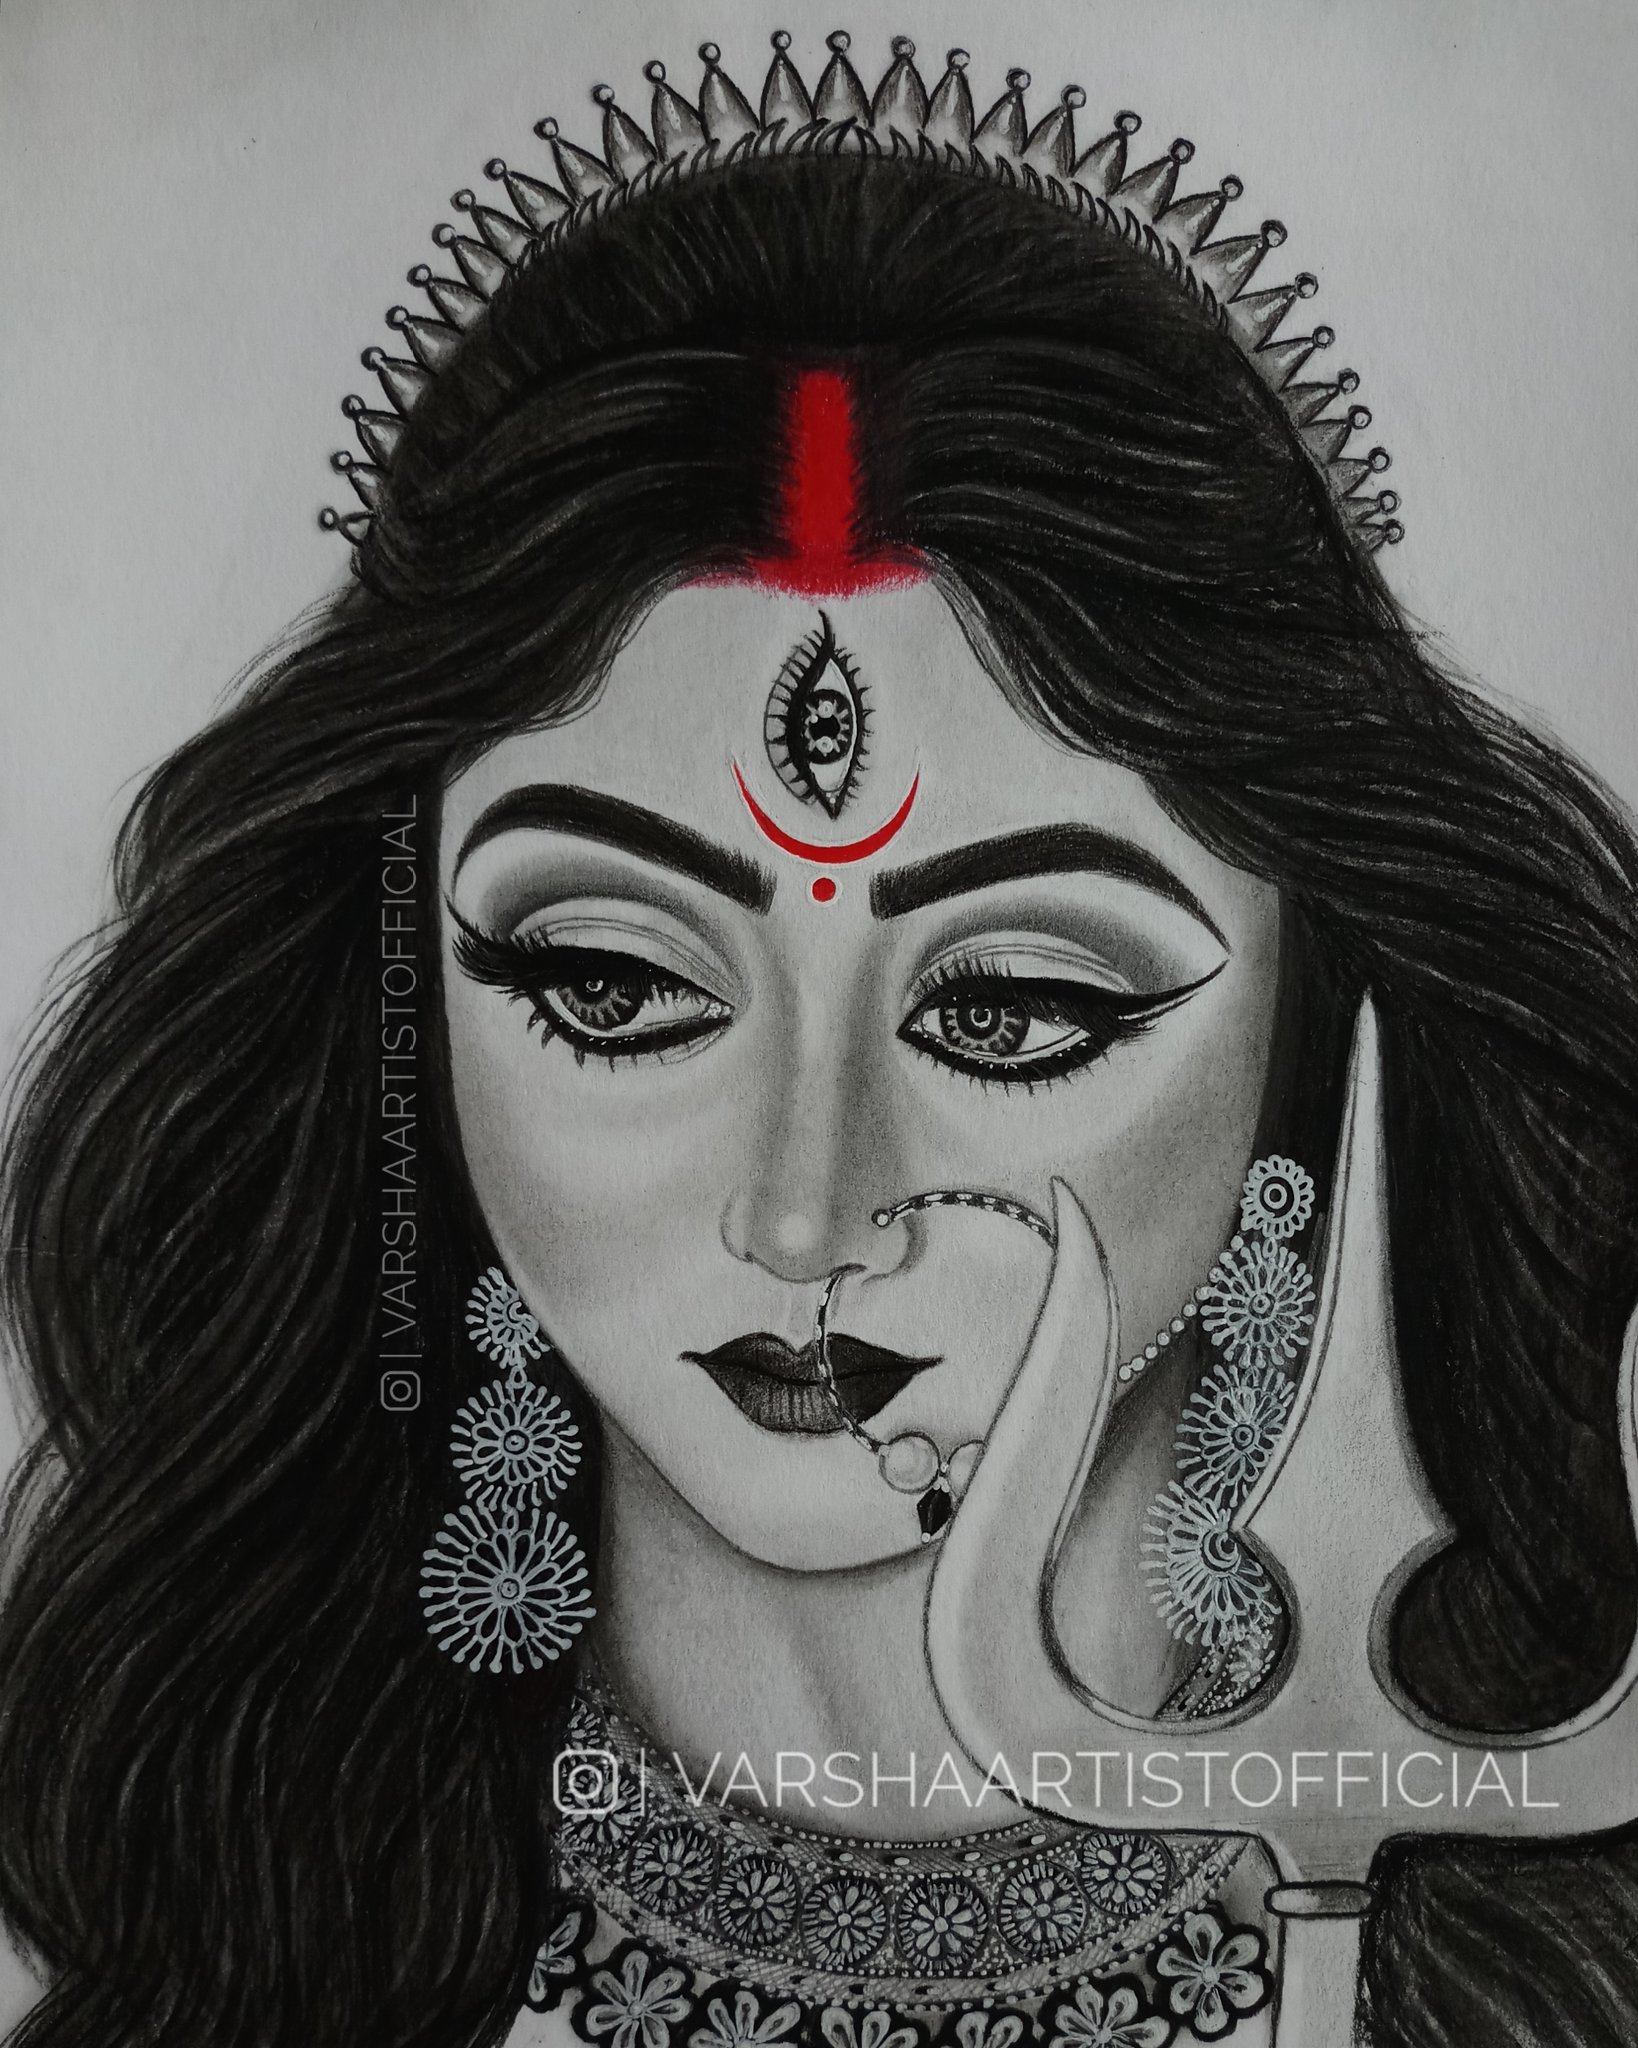 How to Draw Durga Maa Face Step by Step | Outline drawing of Maa Durga 2020  - YouTube